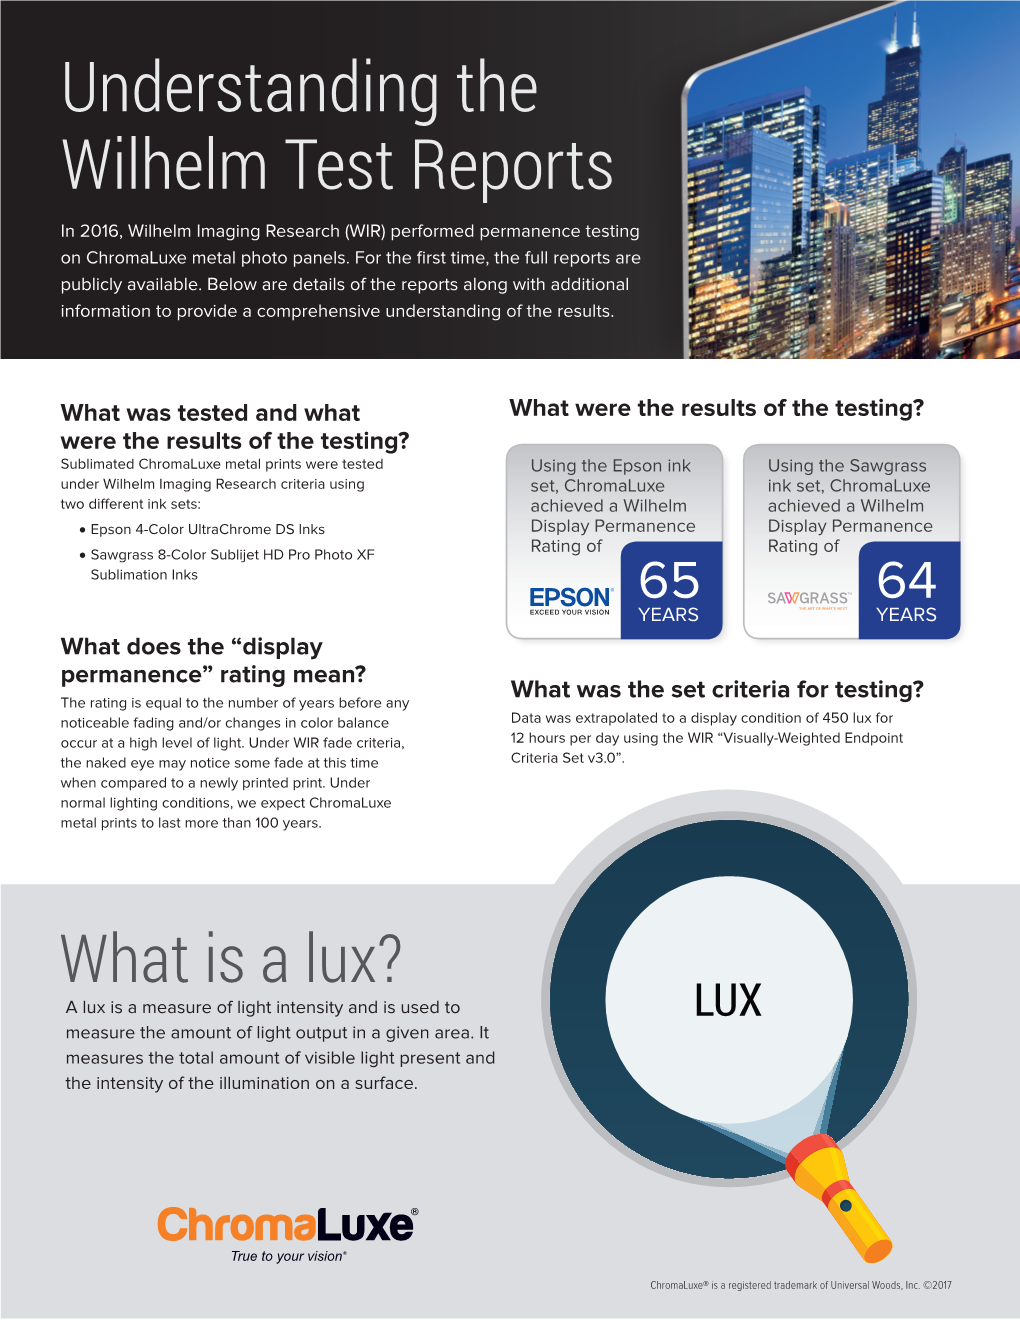 Understanding the Wilhelm Test Reports in 2016, Wilhelm Imaging Research (WIR) Performed Permanence Testing on Chromaluxe Metal Photo Panels